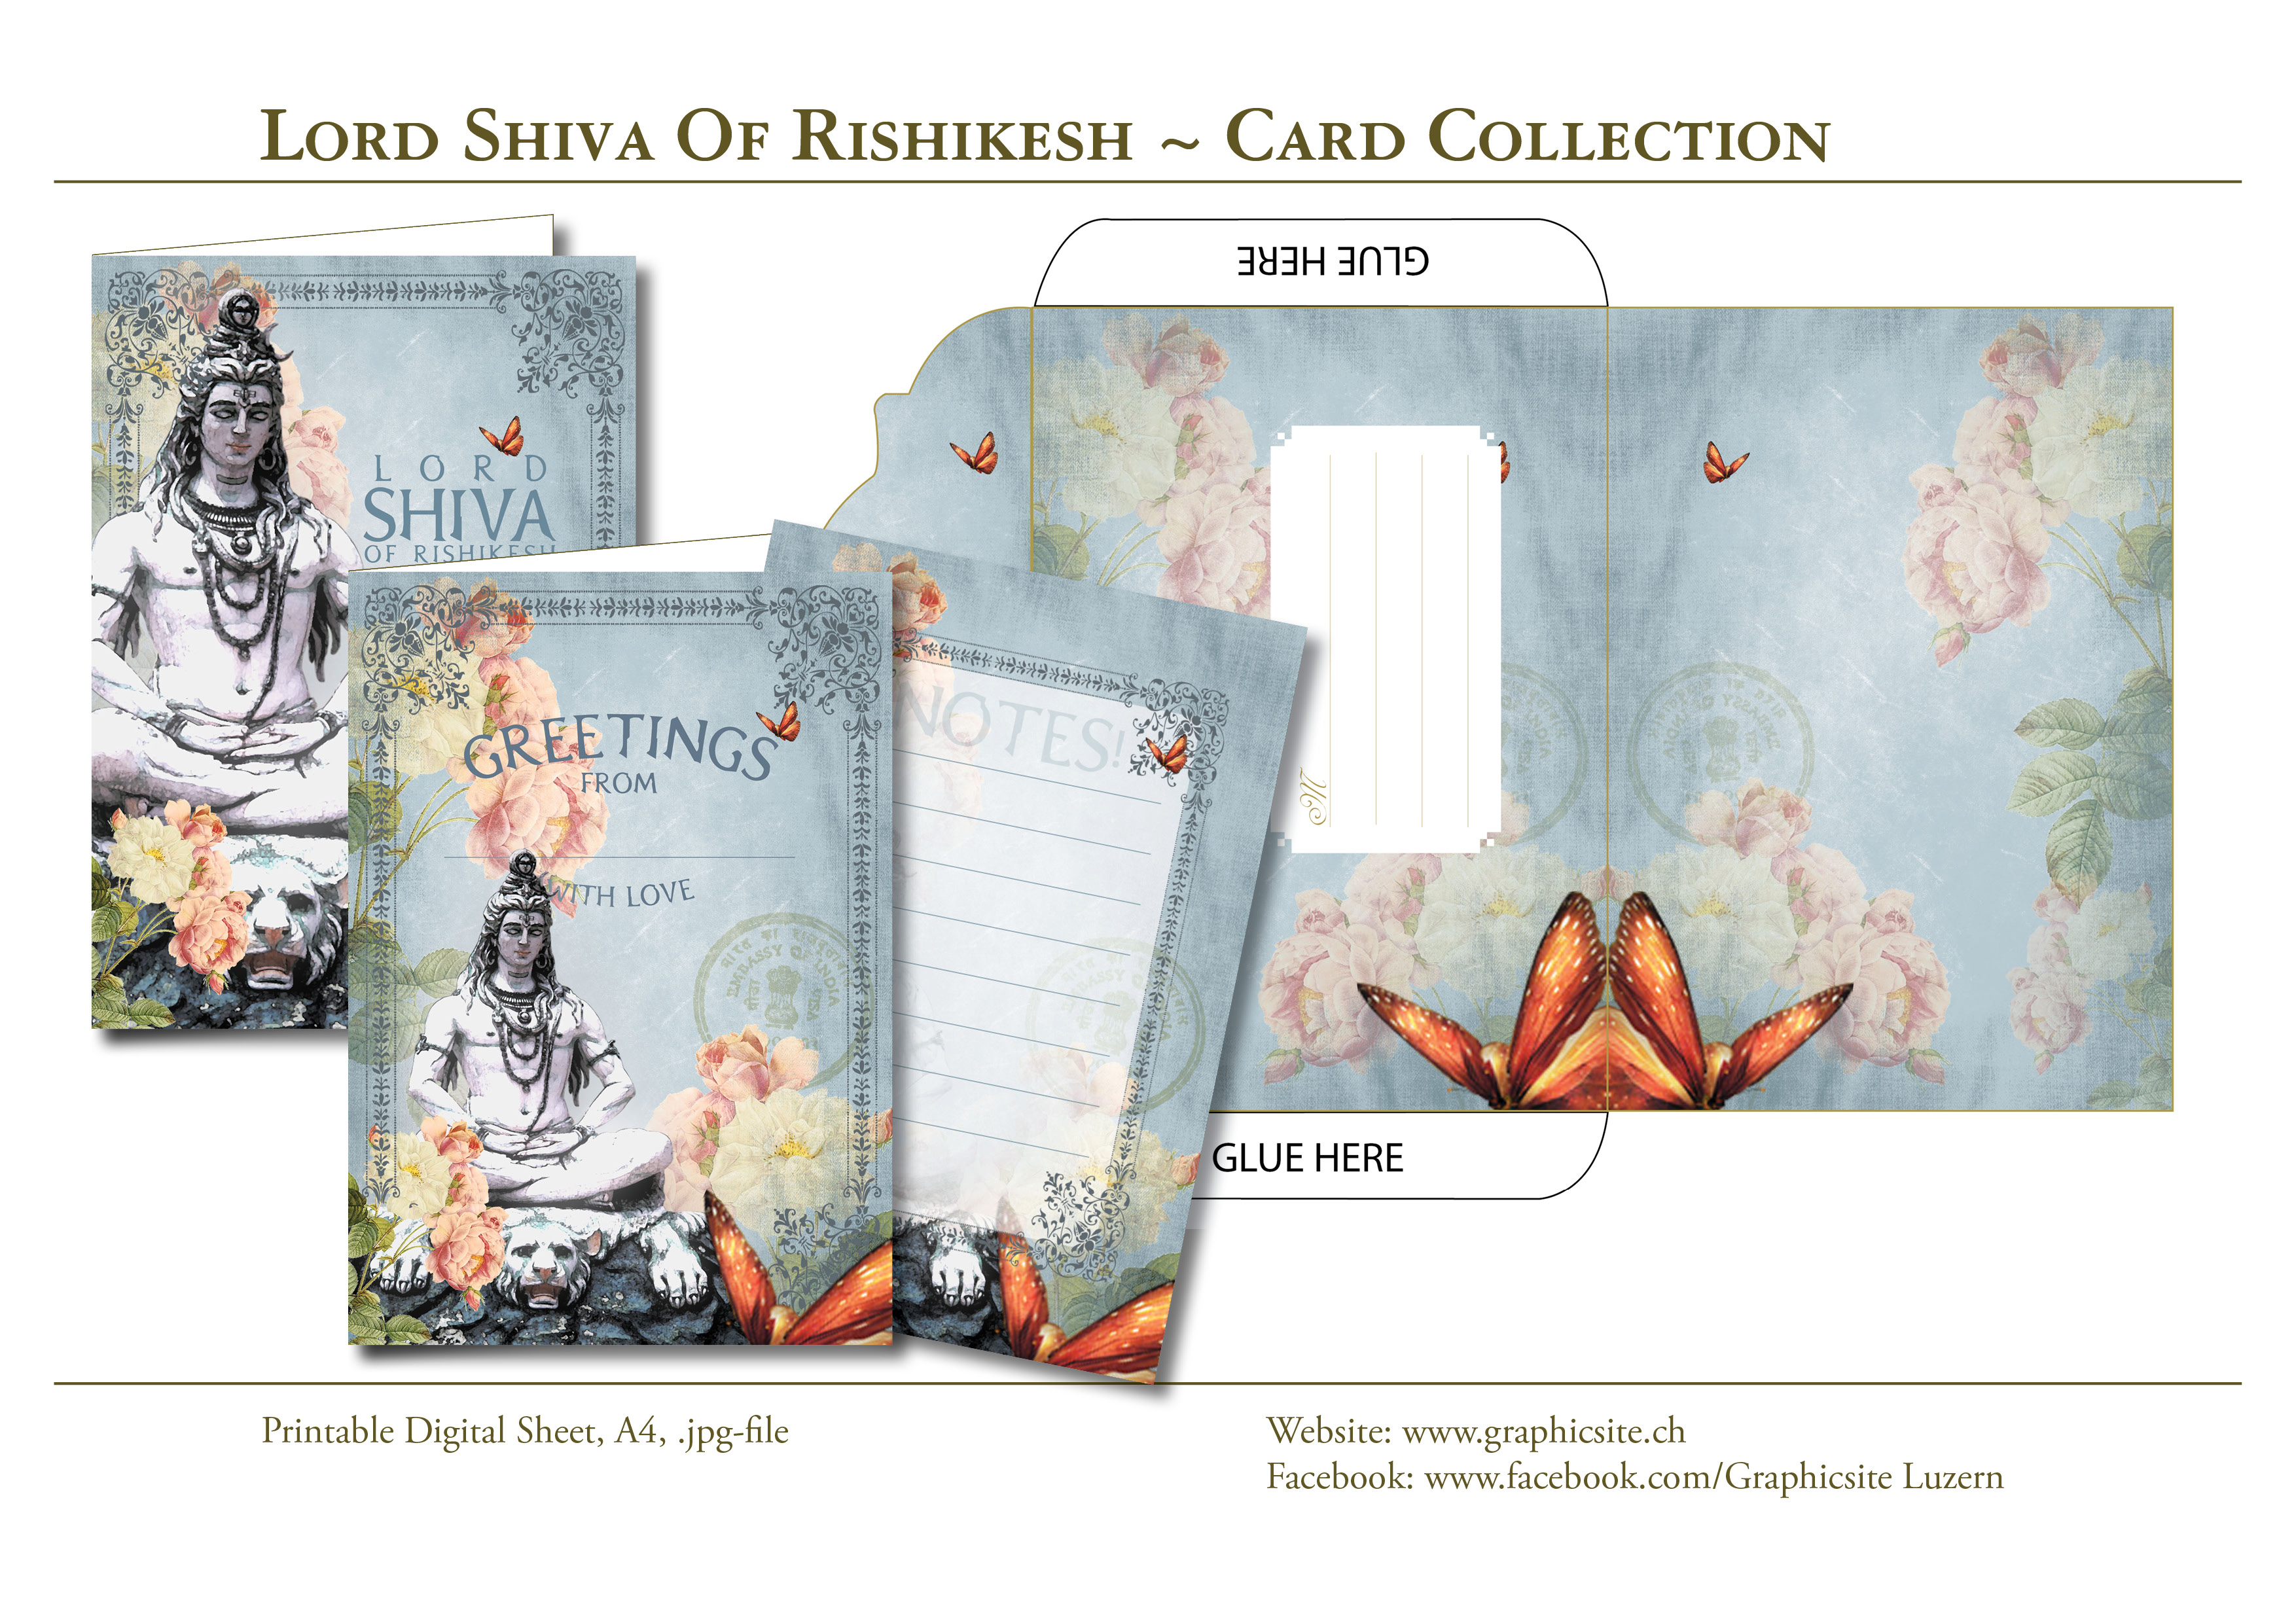 Printable Digital Sheets - DIN A-Formats - Lord Shiva Of Rishikesh - Card Collection - #cards, #greetingcards, #lord, #shiva, #graphicdesign, #luzern, #schweiz,